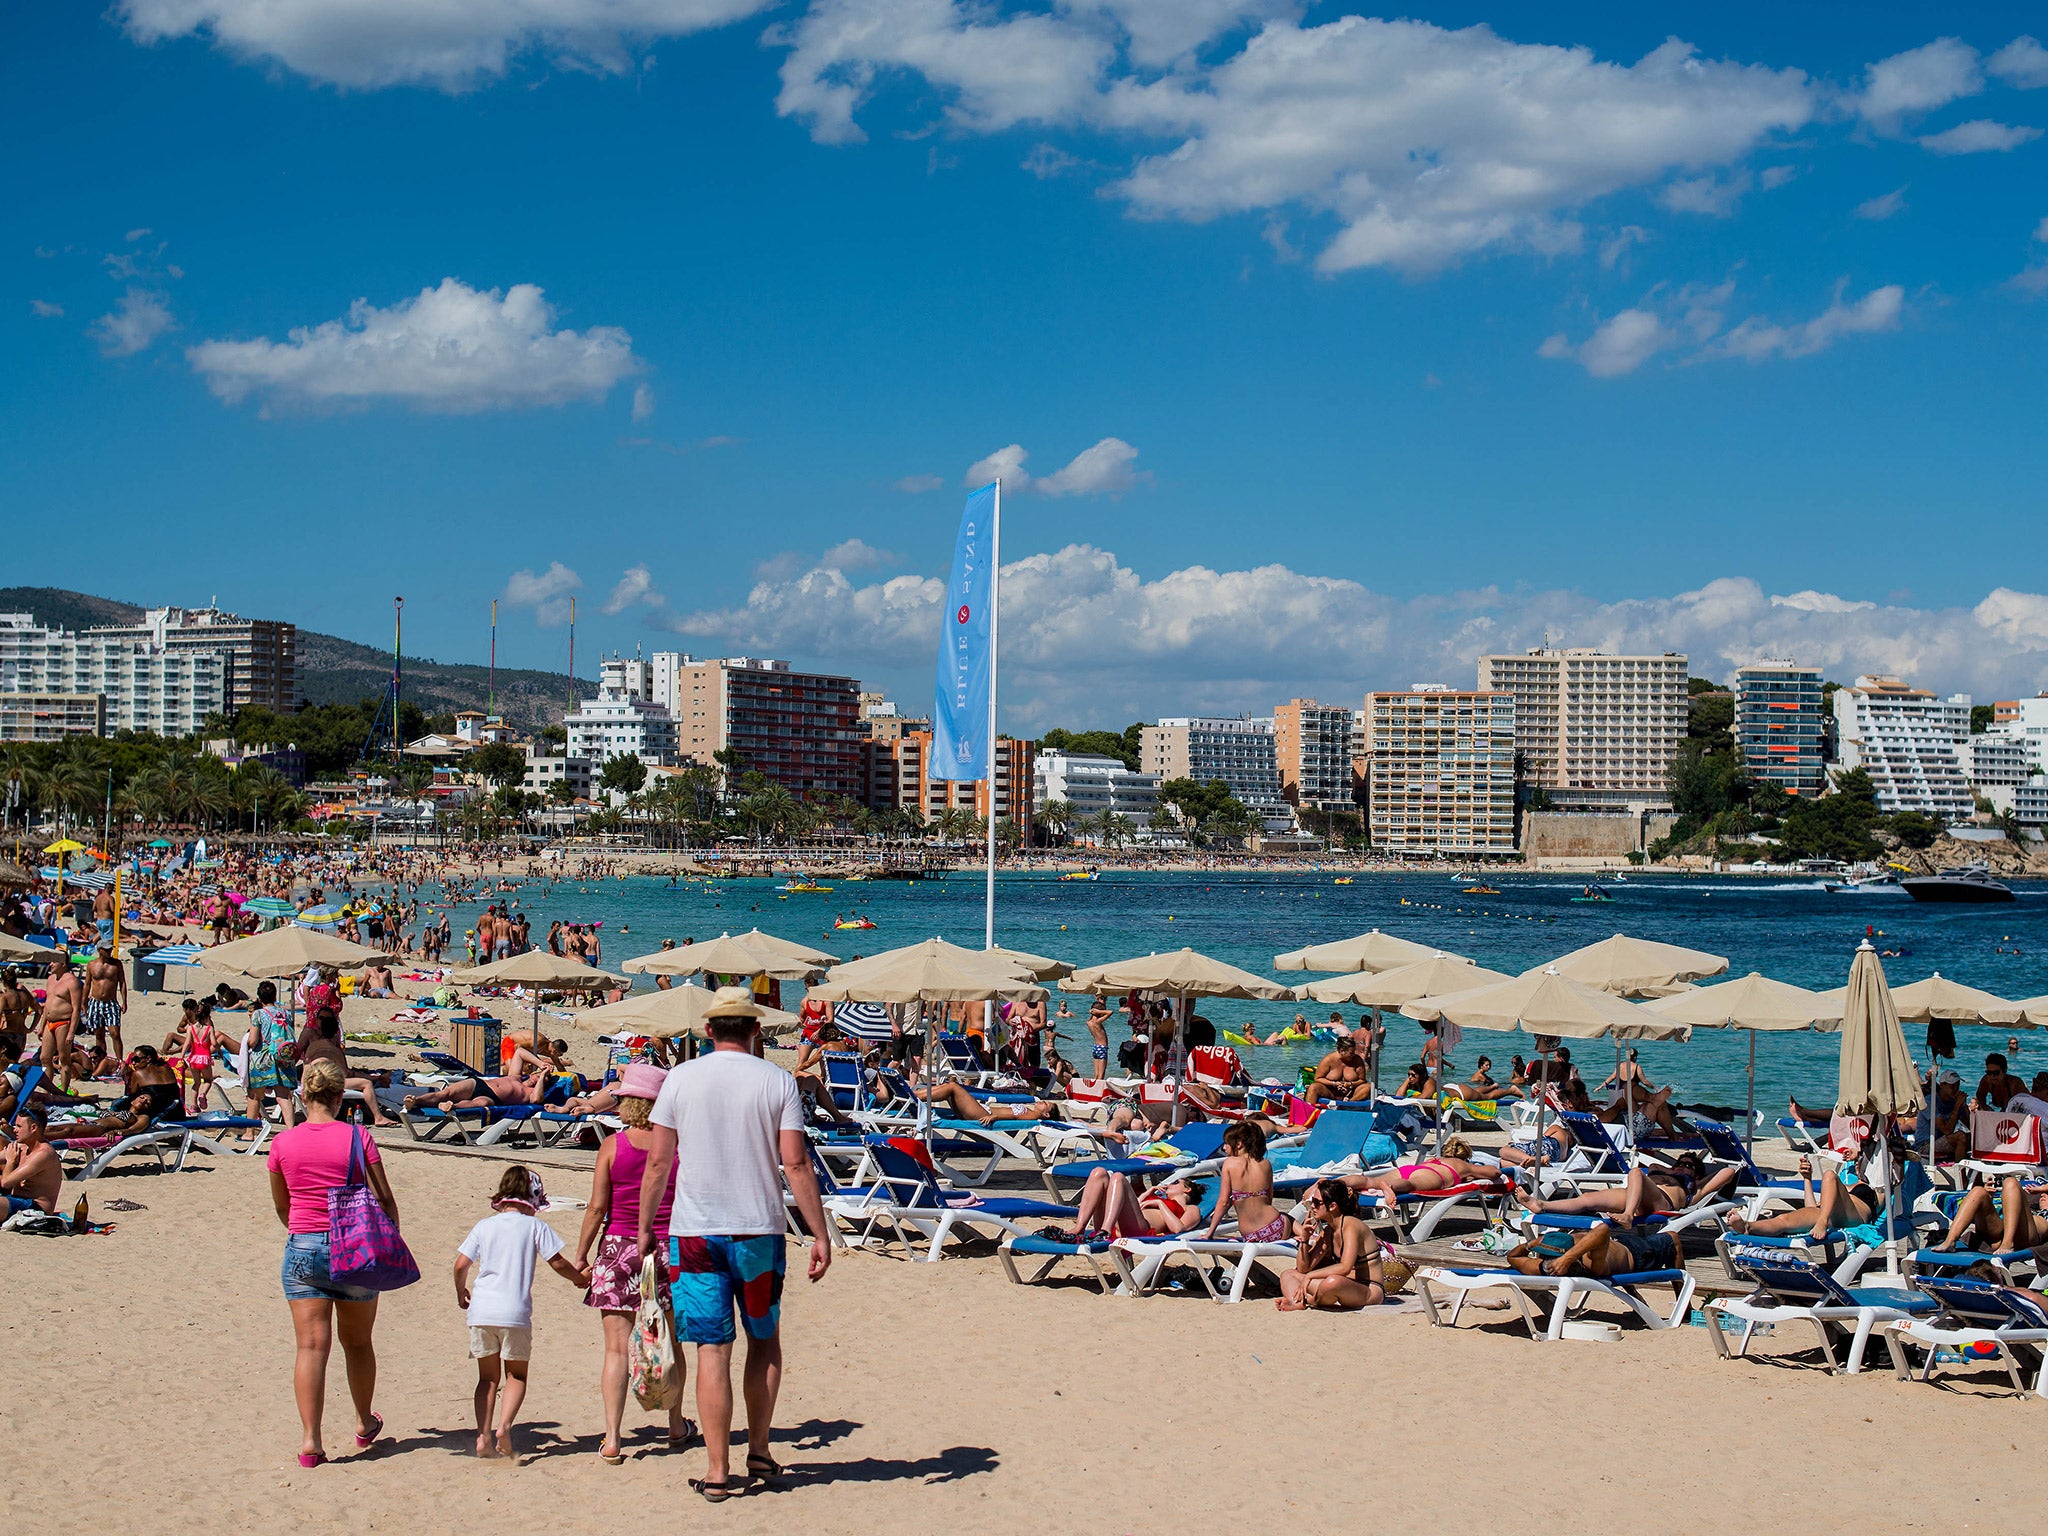 Spain is 'pretty much sold out' according to Tui's chief executive